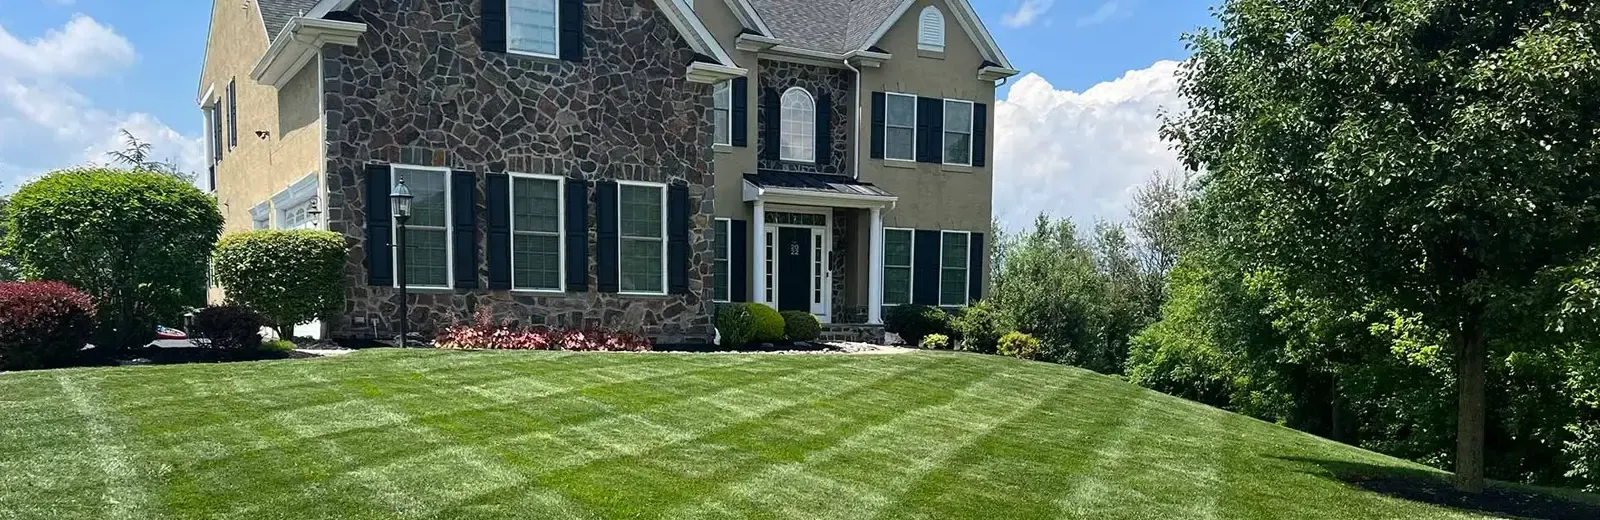 natural stone home with green lawn